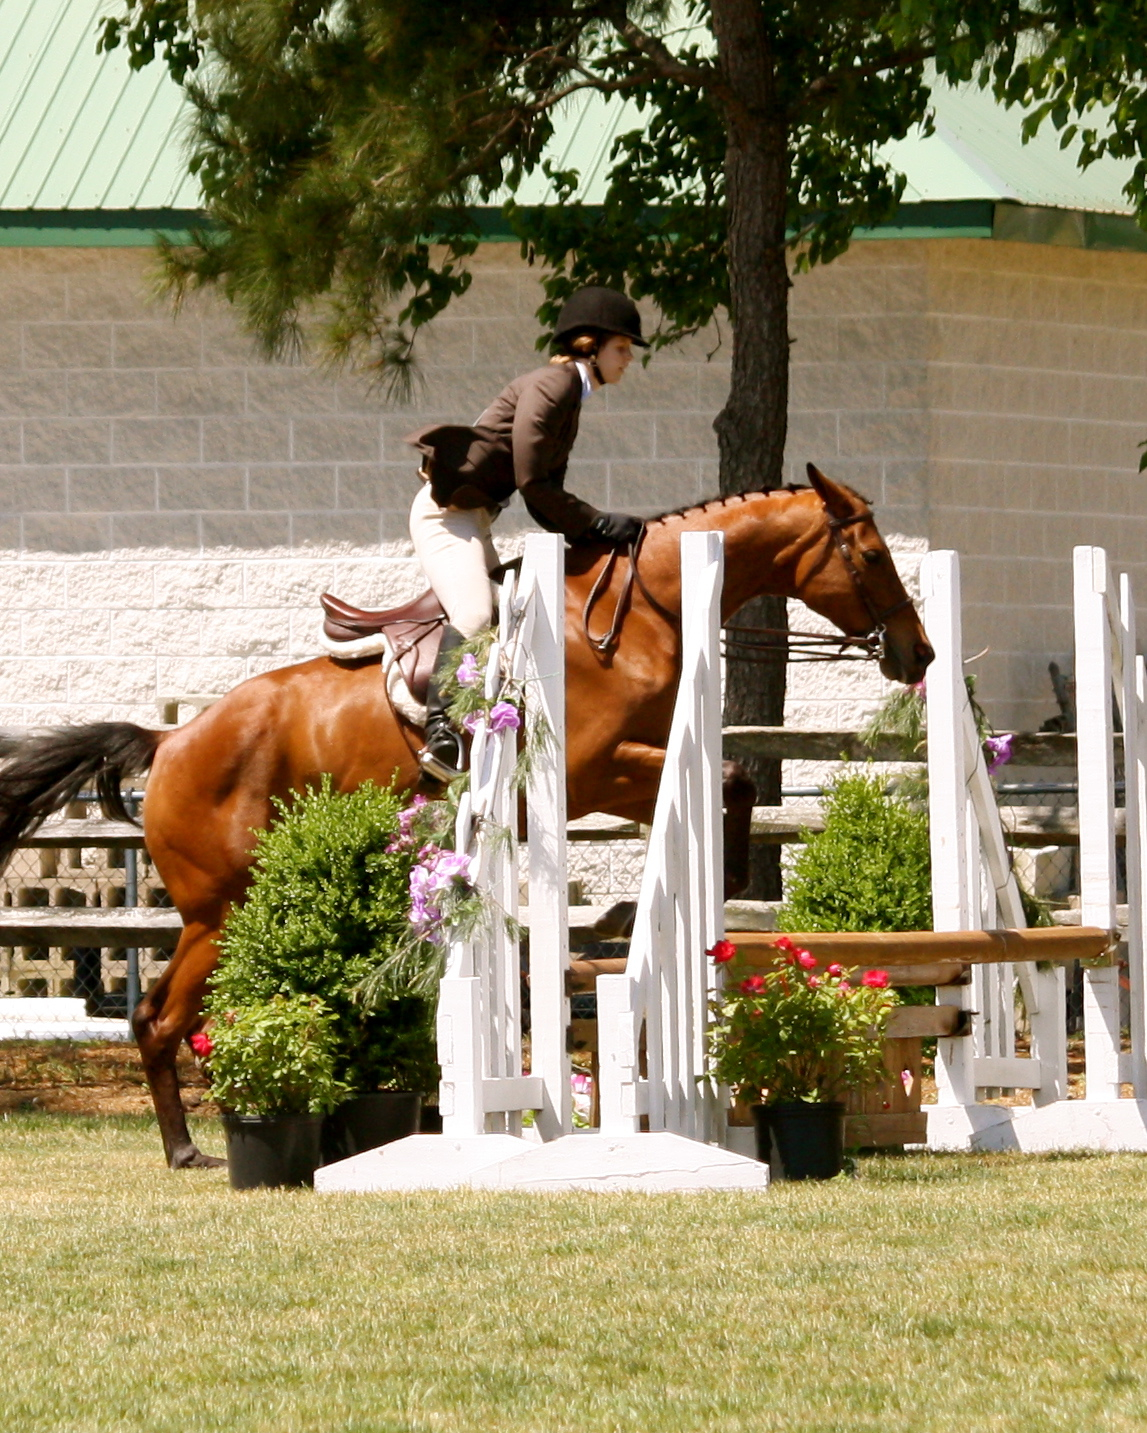 woman on horse jumping a jump at a horse show